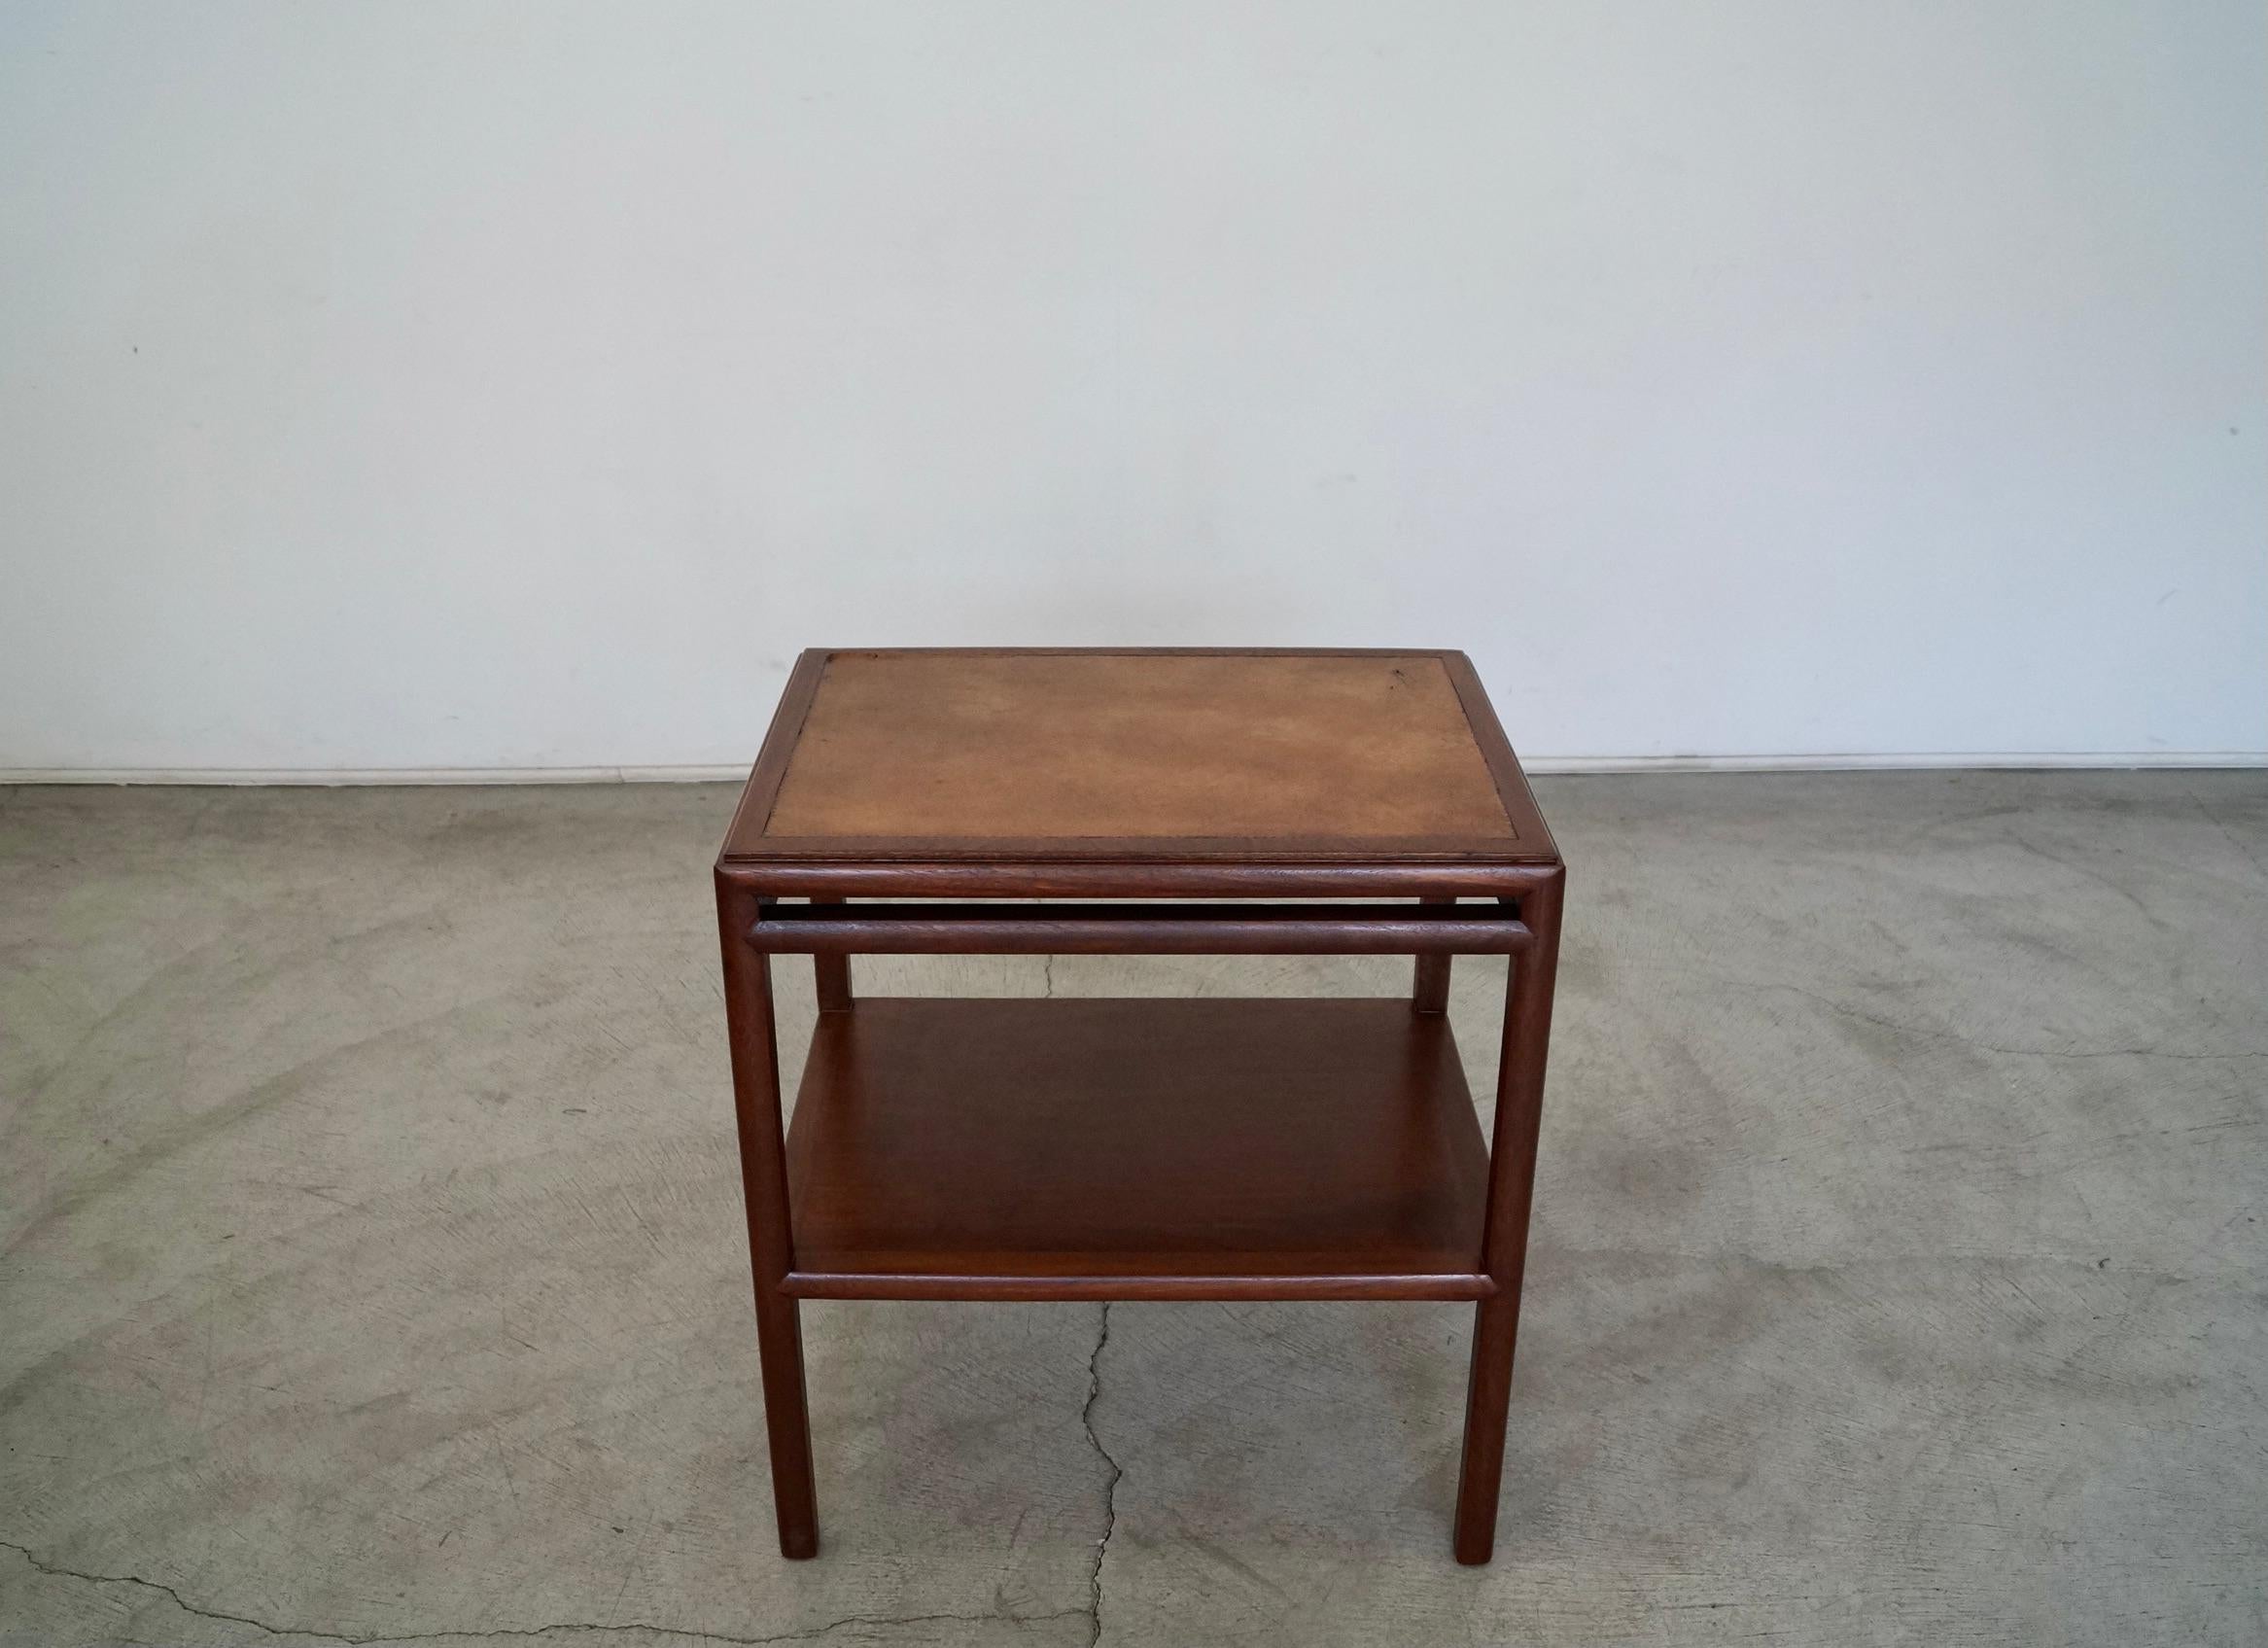 Vintage 1950's Mid-Century Modern side table for sale. In the manner of Edward Wormley for Dunbar, and has been professionally refinished in walnut. It has the original leather inlaid surface, and is rare. This table is a high-quality table